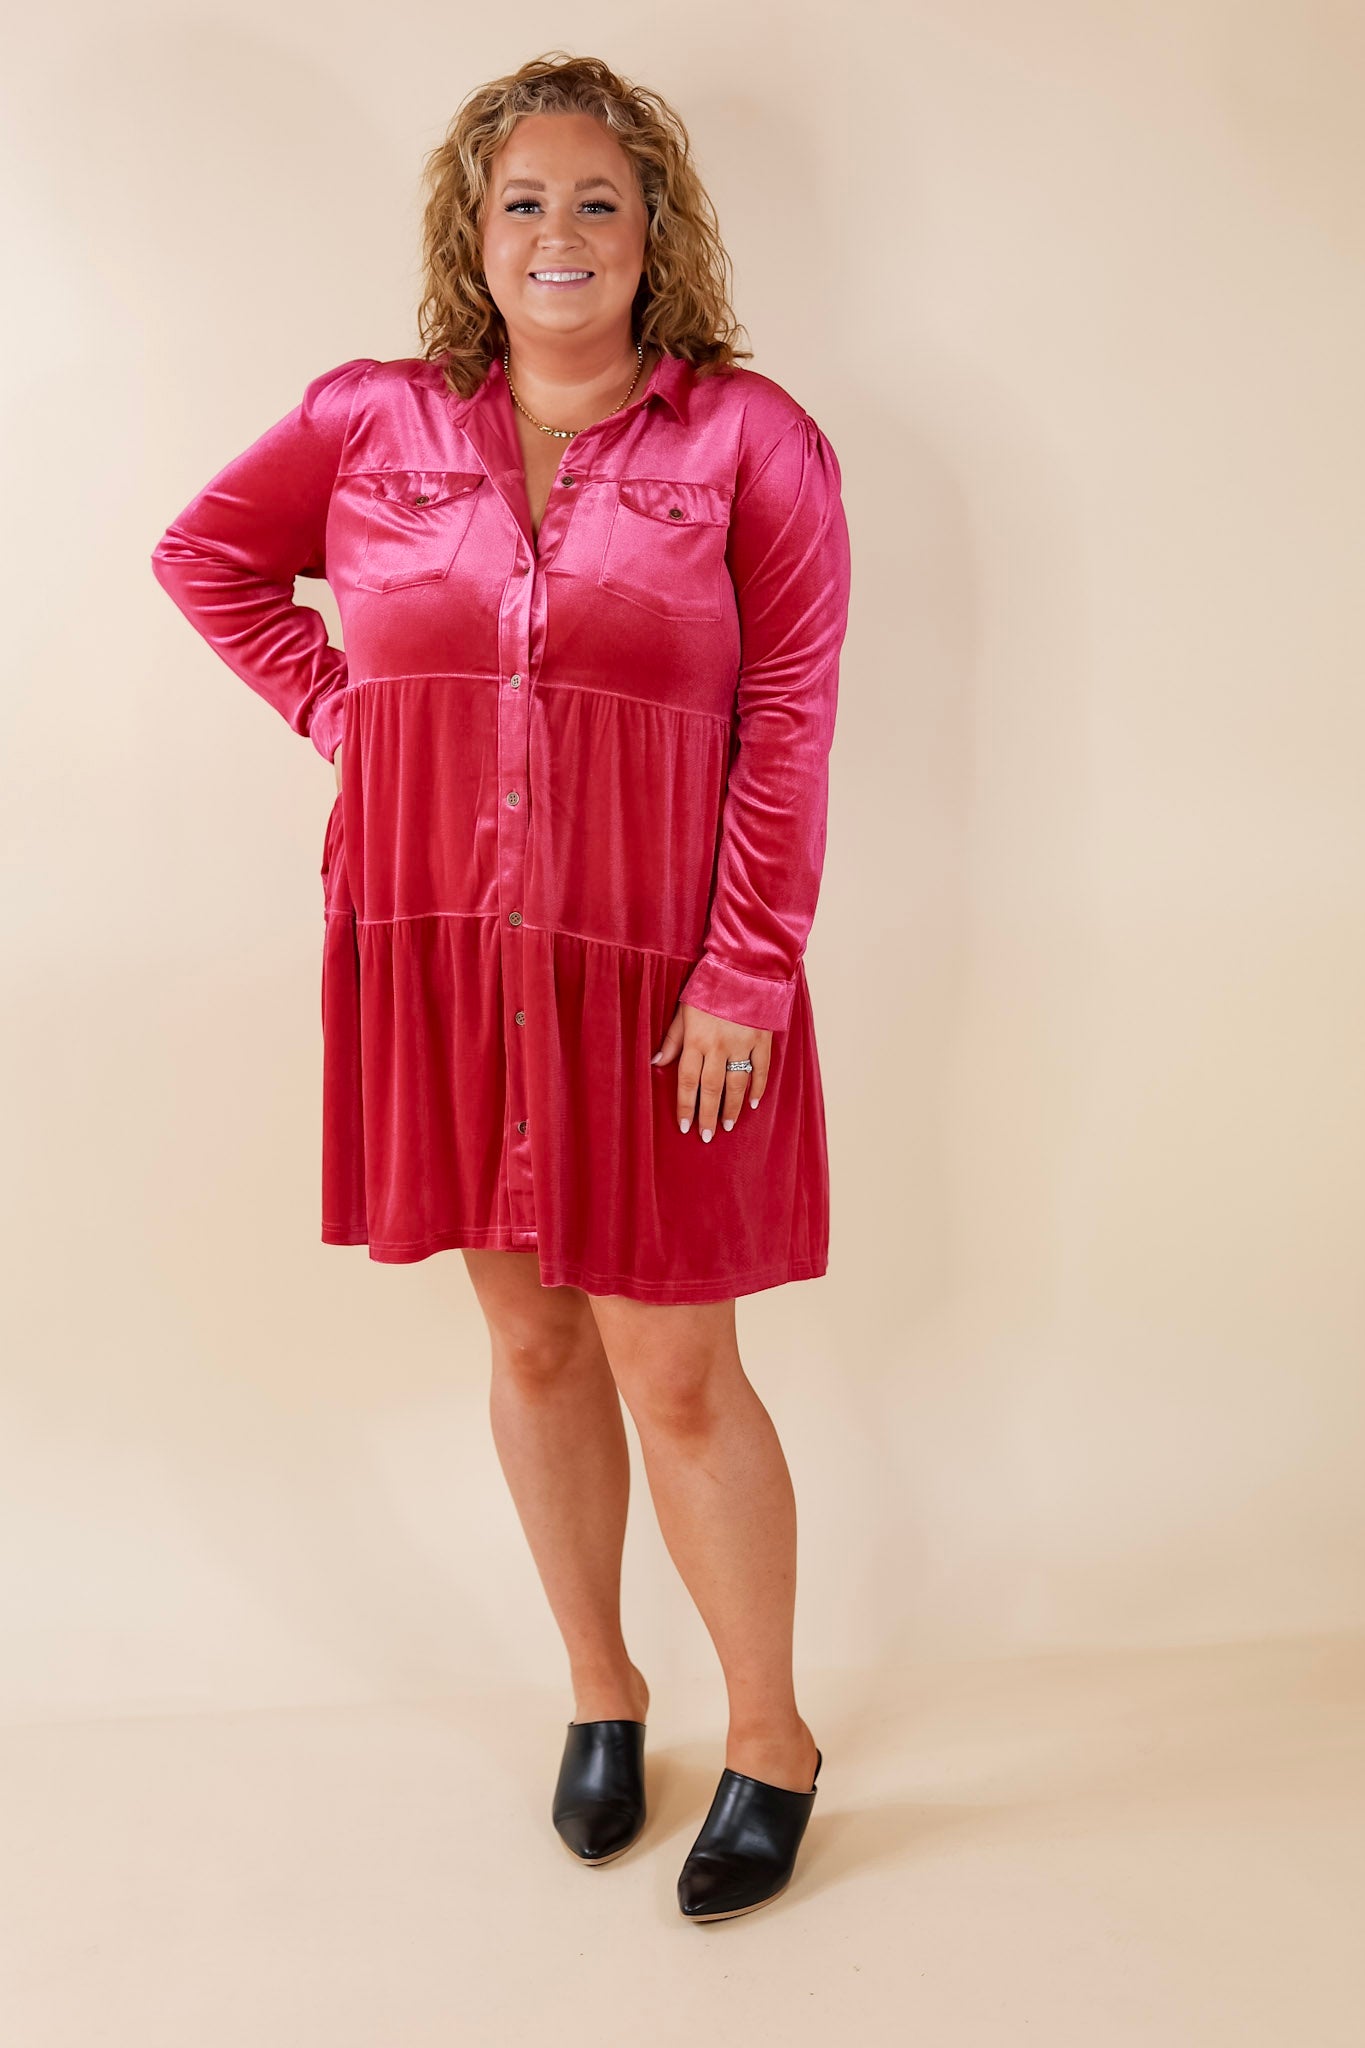 Grateful Gathering Velvet Button Up Dress with Long Sleeves in Raspberry Pink